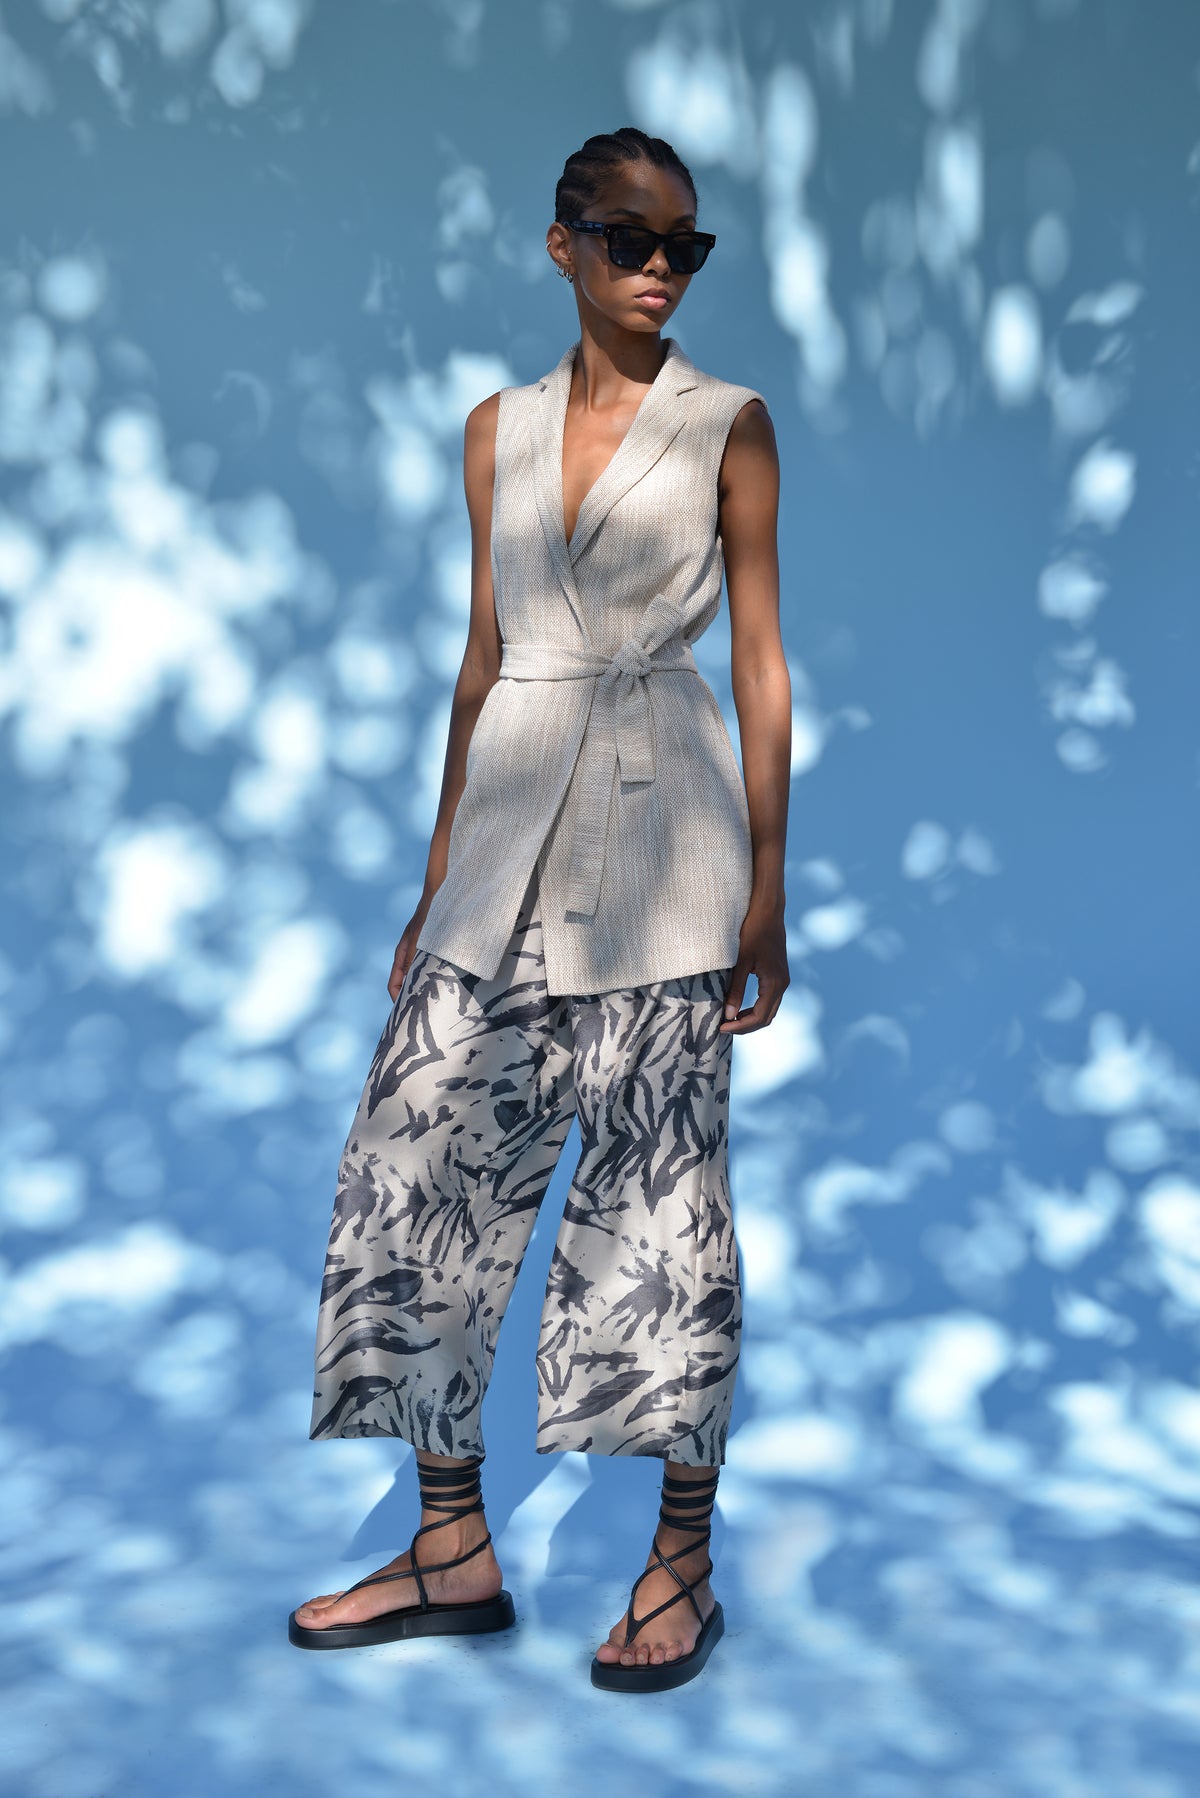 vest 1934.263.114
printed trousers 6676.272.114